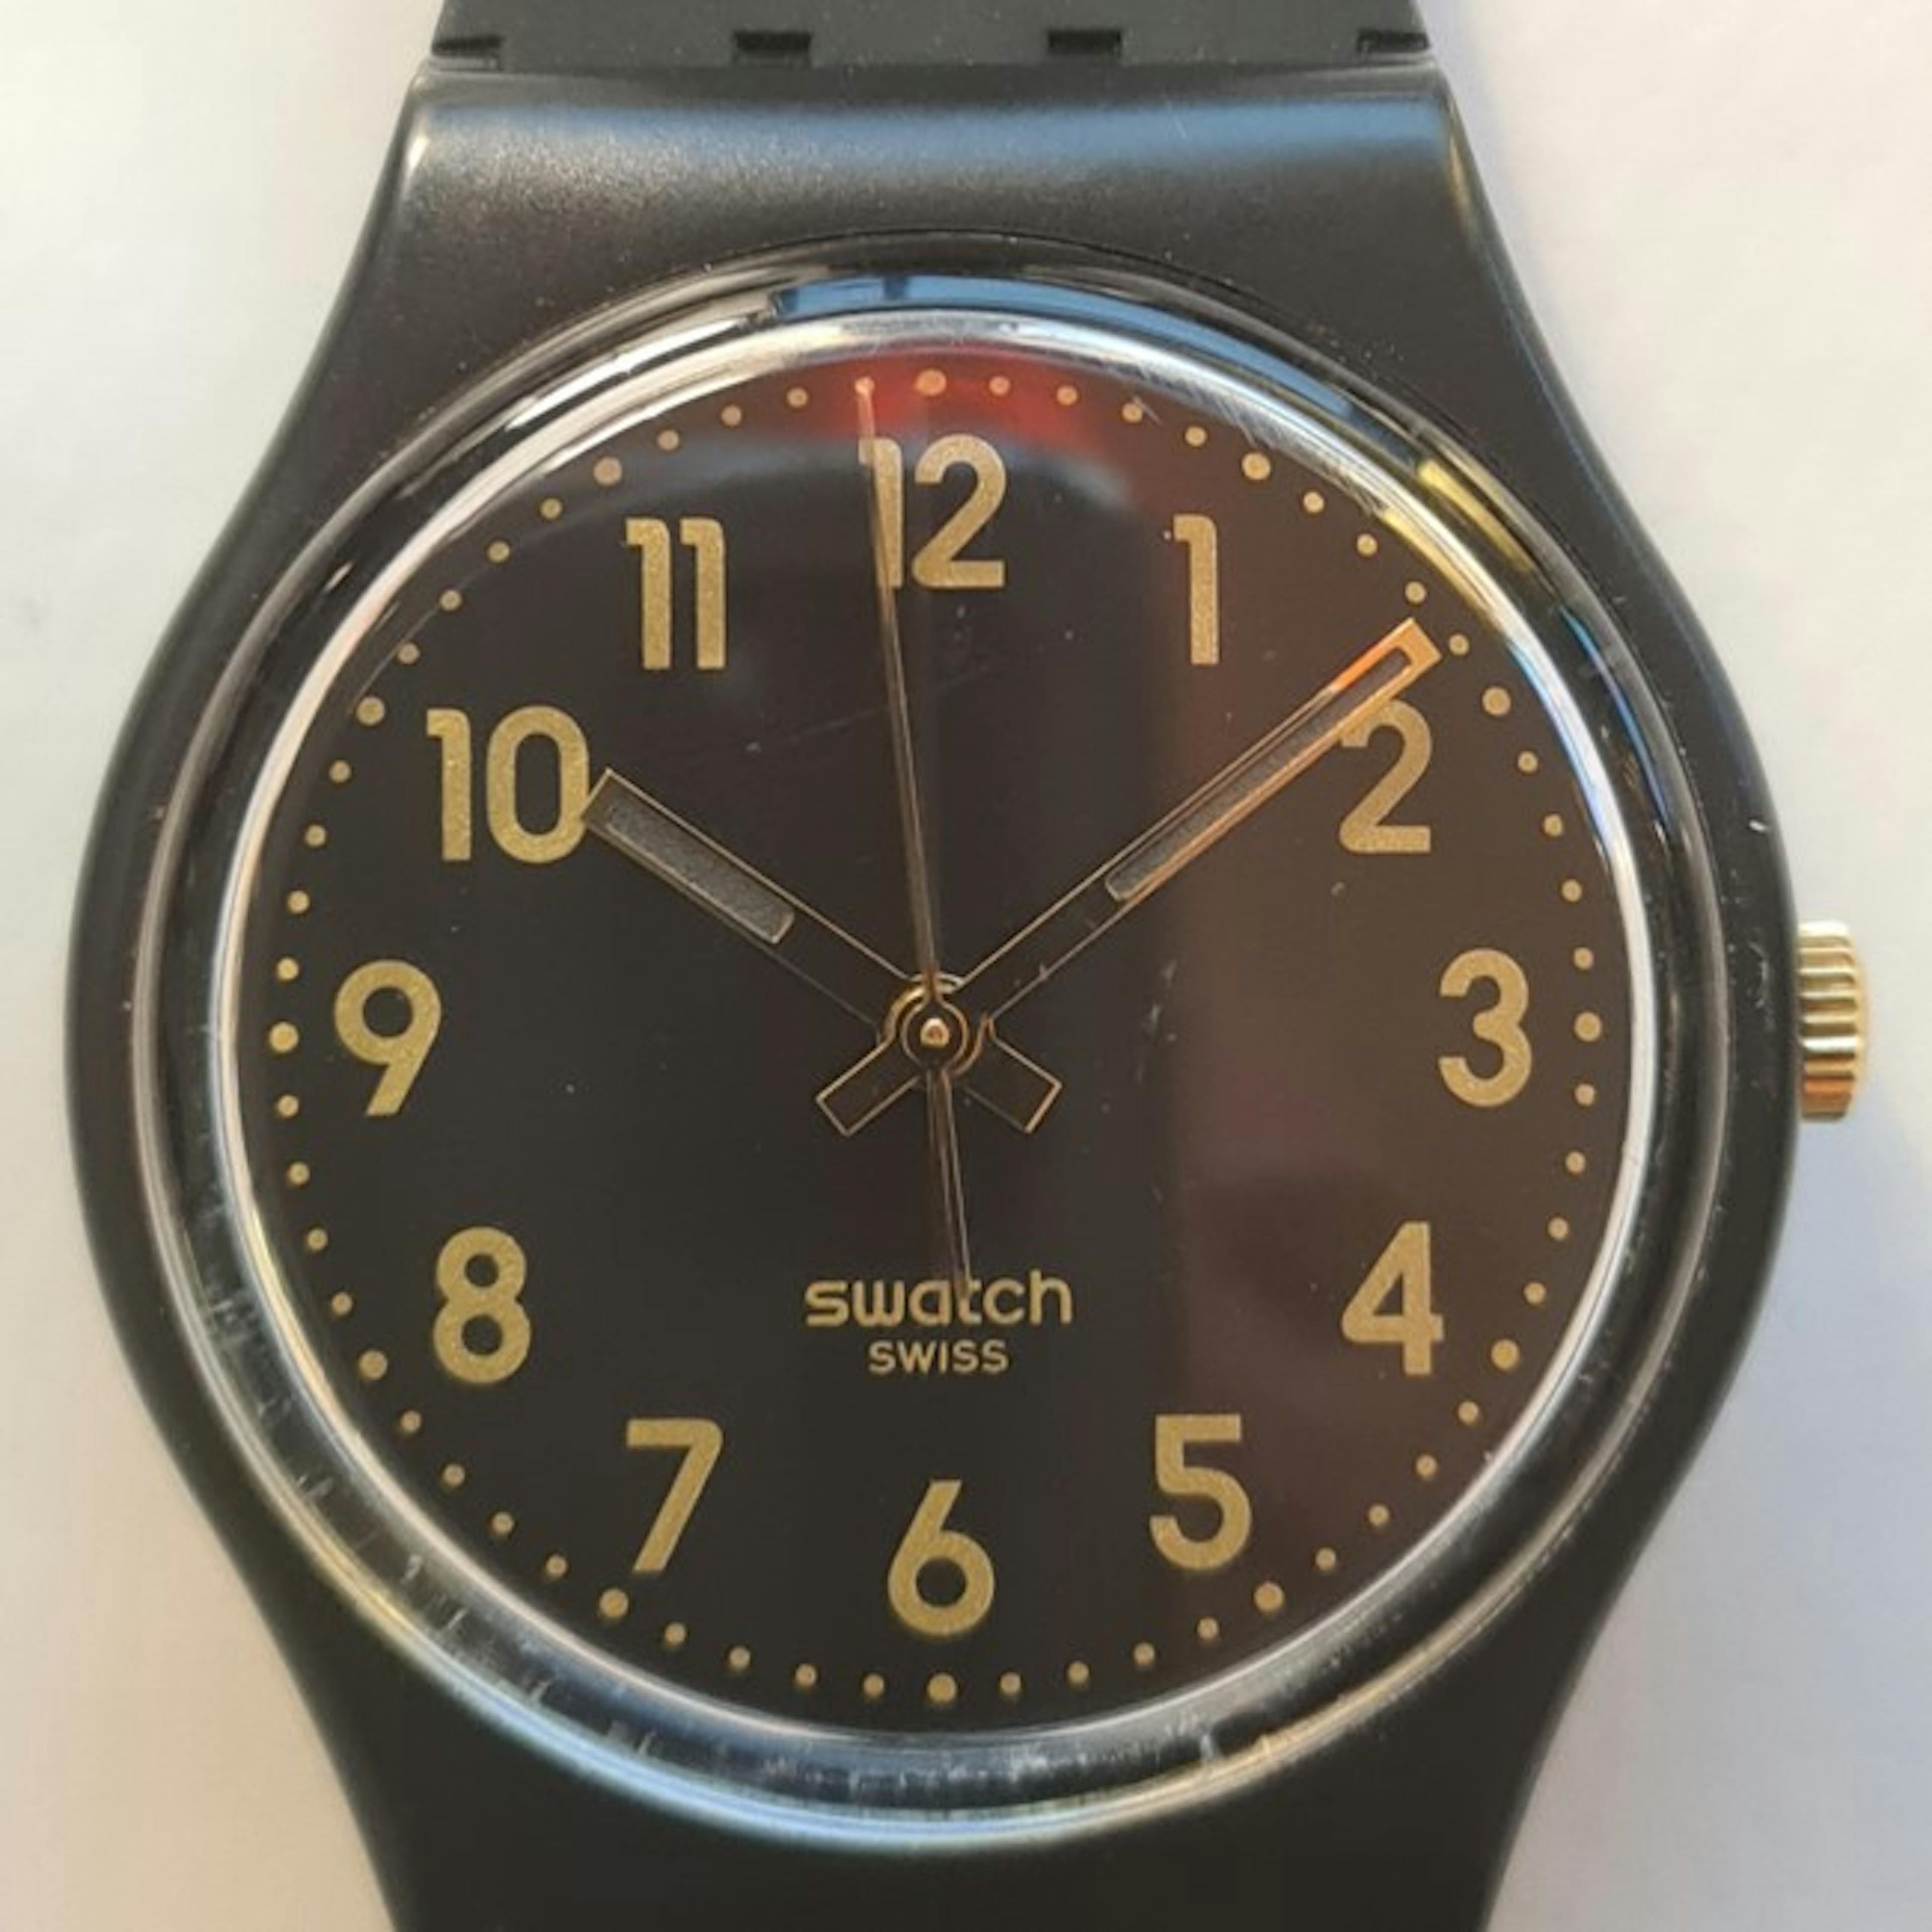 A Standard size men's Swatch. This design is unchanged since 1983, although the variety of dial, hands, numerals and strap colour runs to thousands of options.